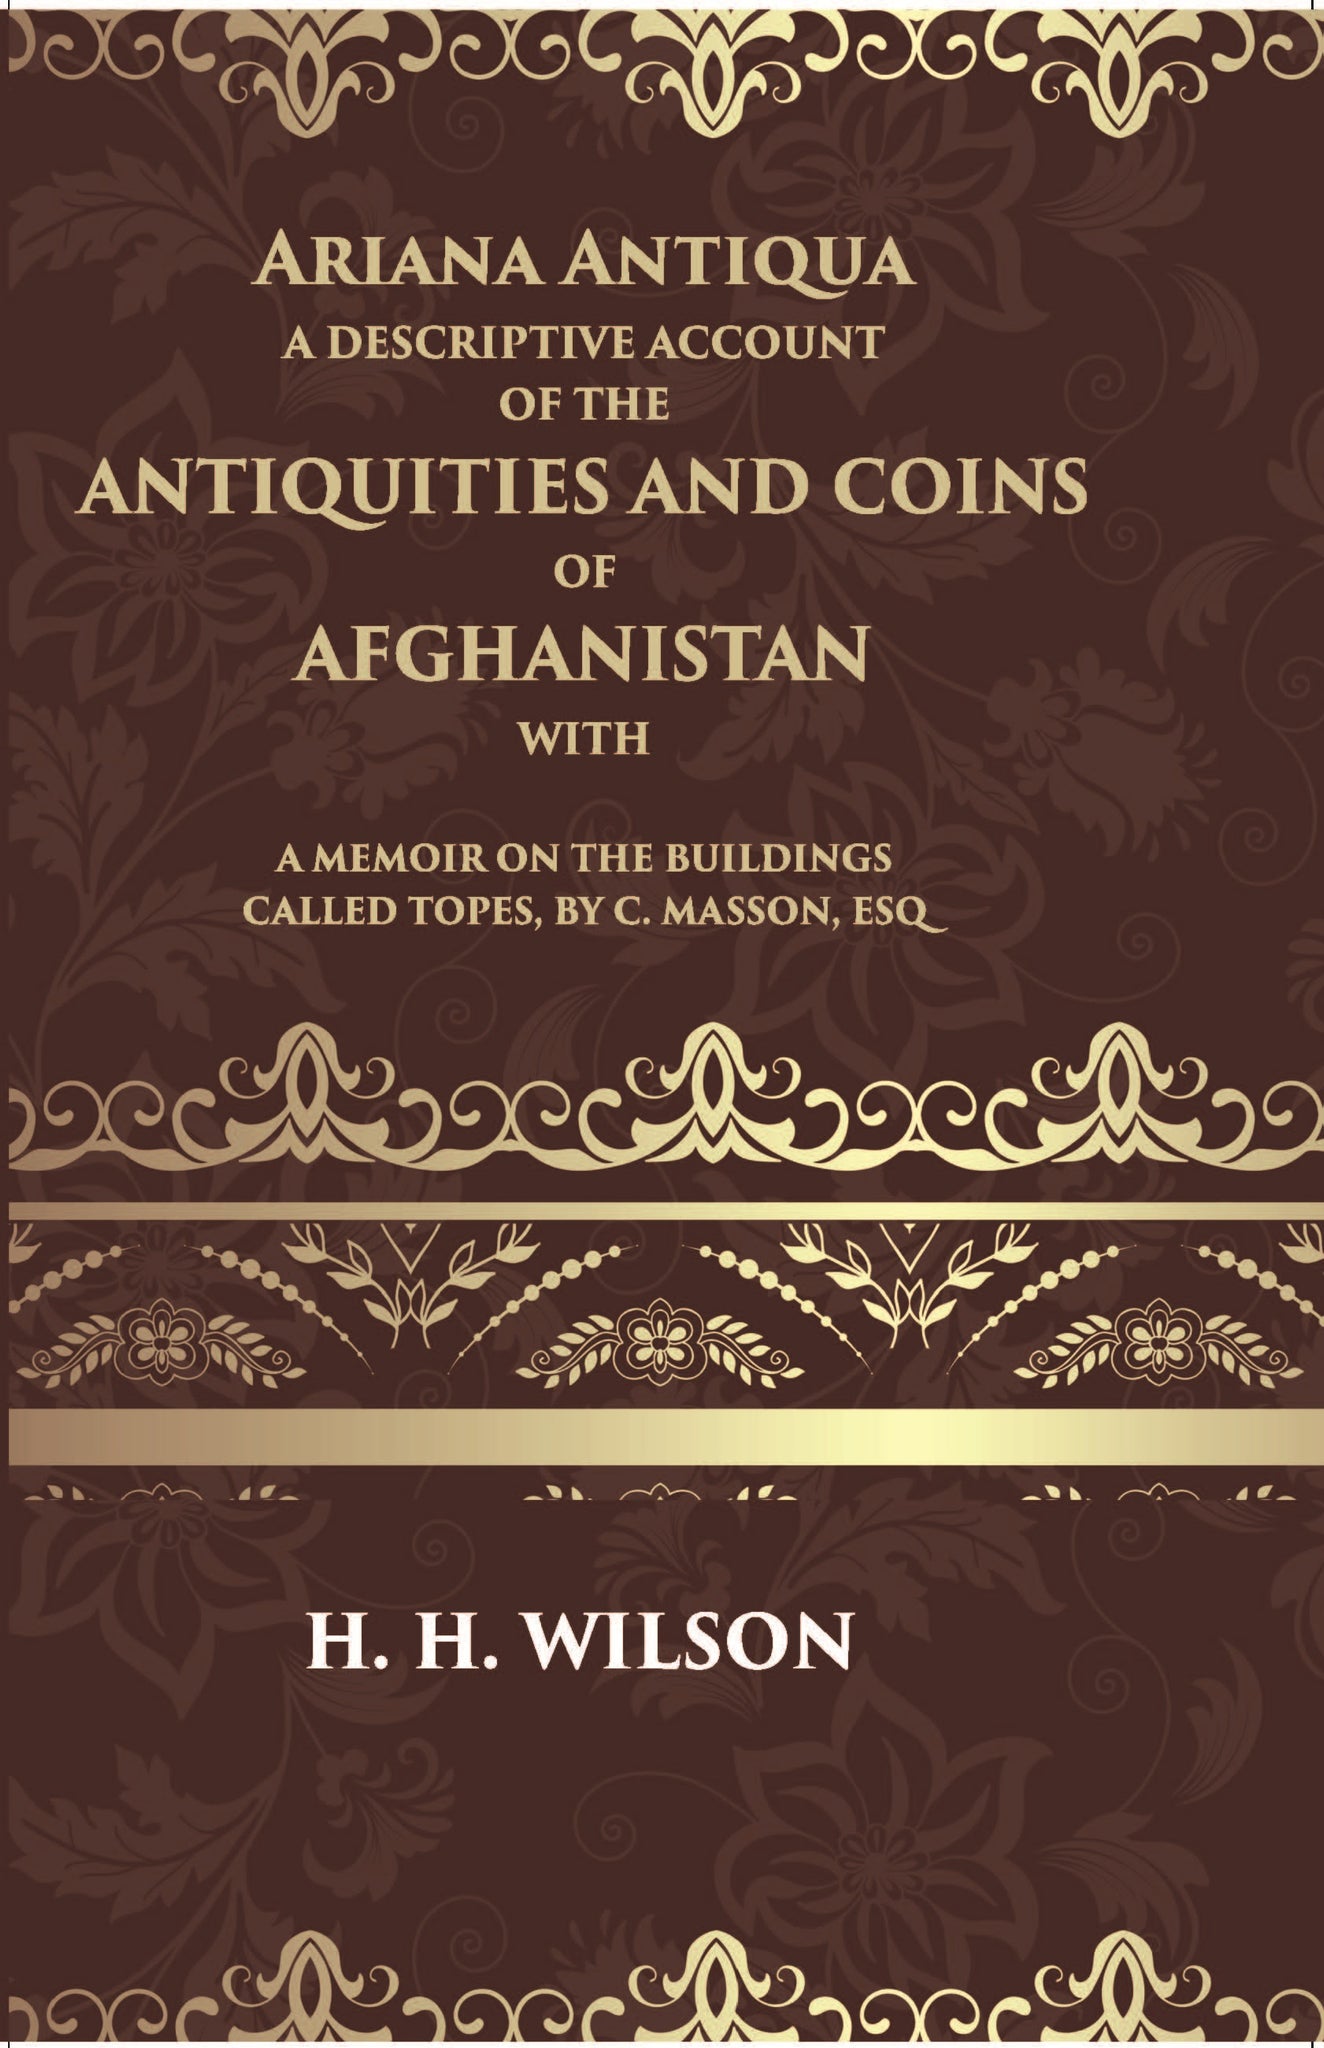 Ariana Antiqua A Descriptive Account Of The Antiquities And Coins Of Afghanistan